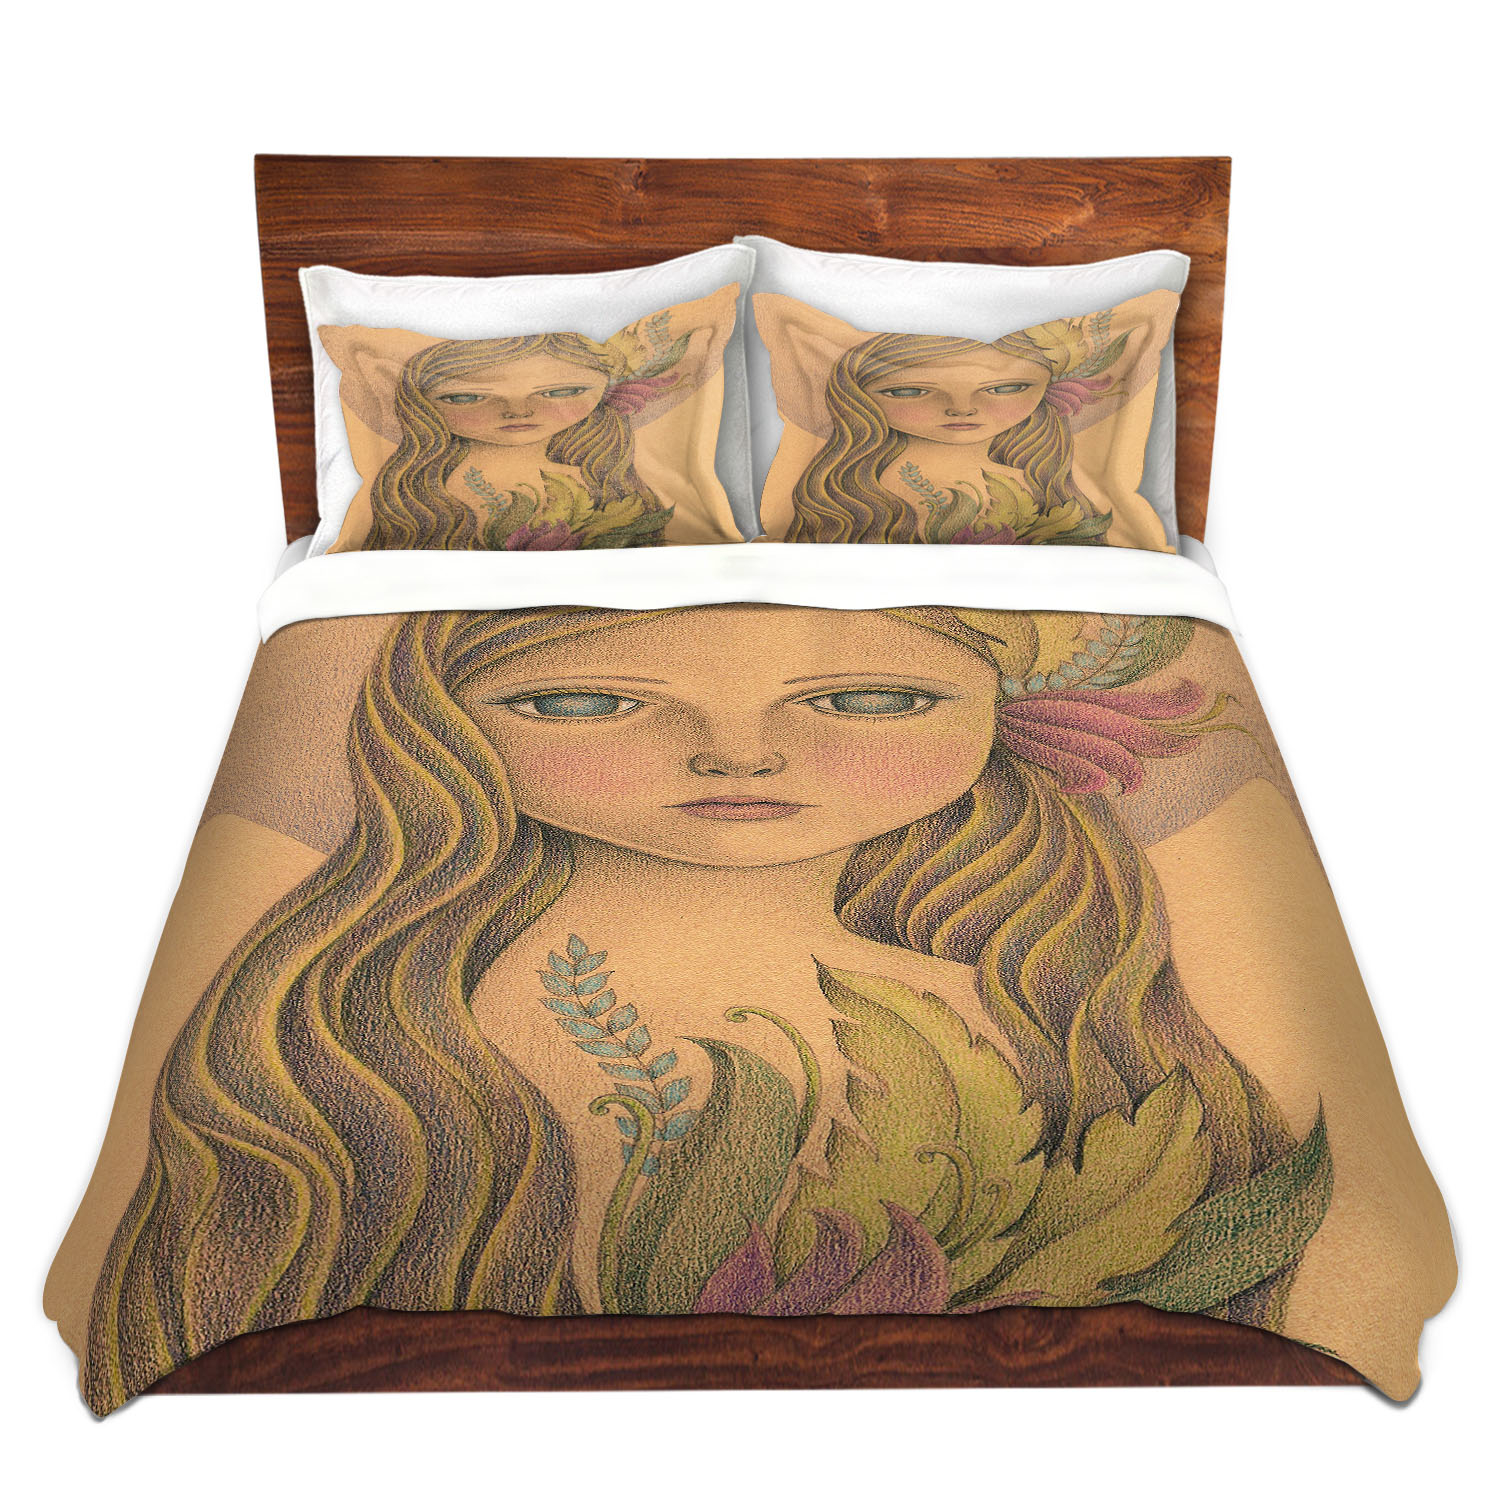 Dianoche Microfiber Duvet Covers By Amalia K. - The Gold In Her Hair